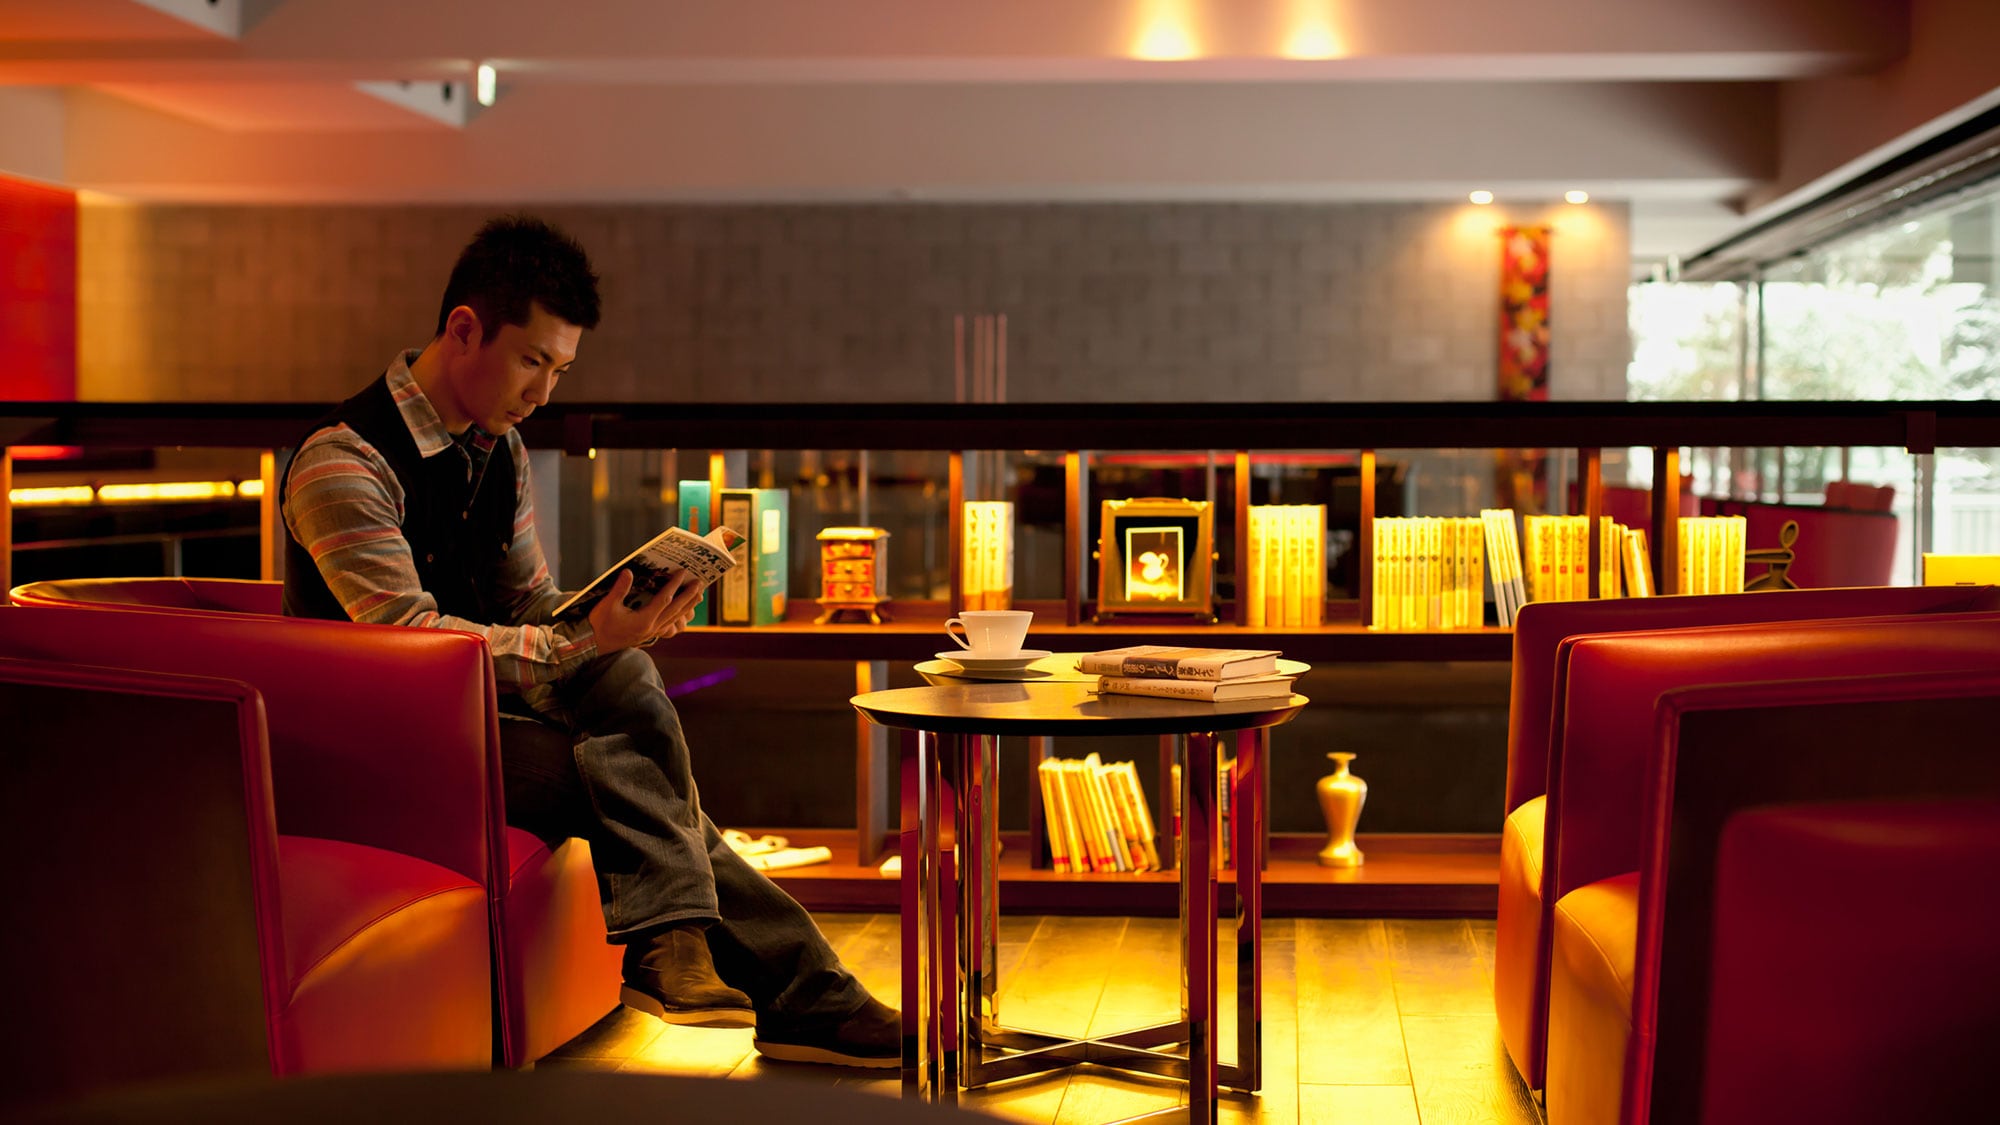 [Noguchi Bunko] You can freely read your favorite books at the bar or lounge, or bring them to your room.